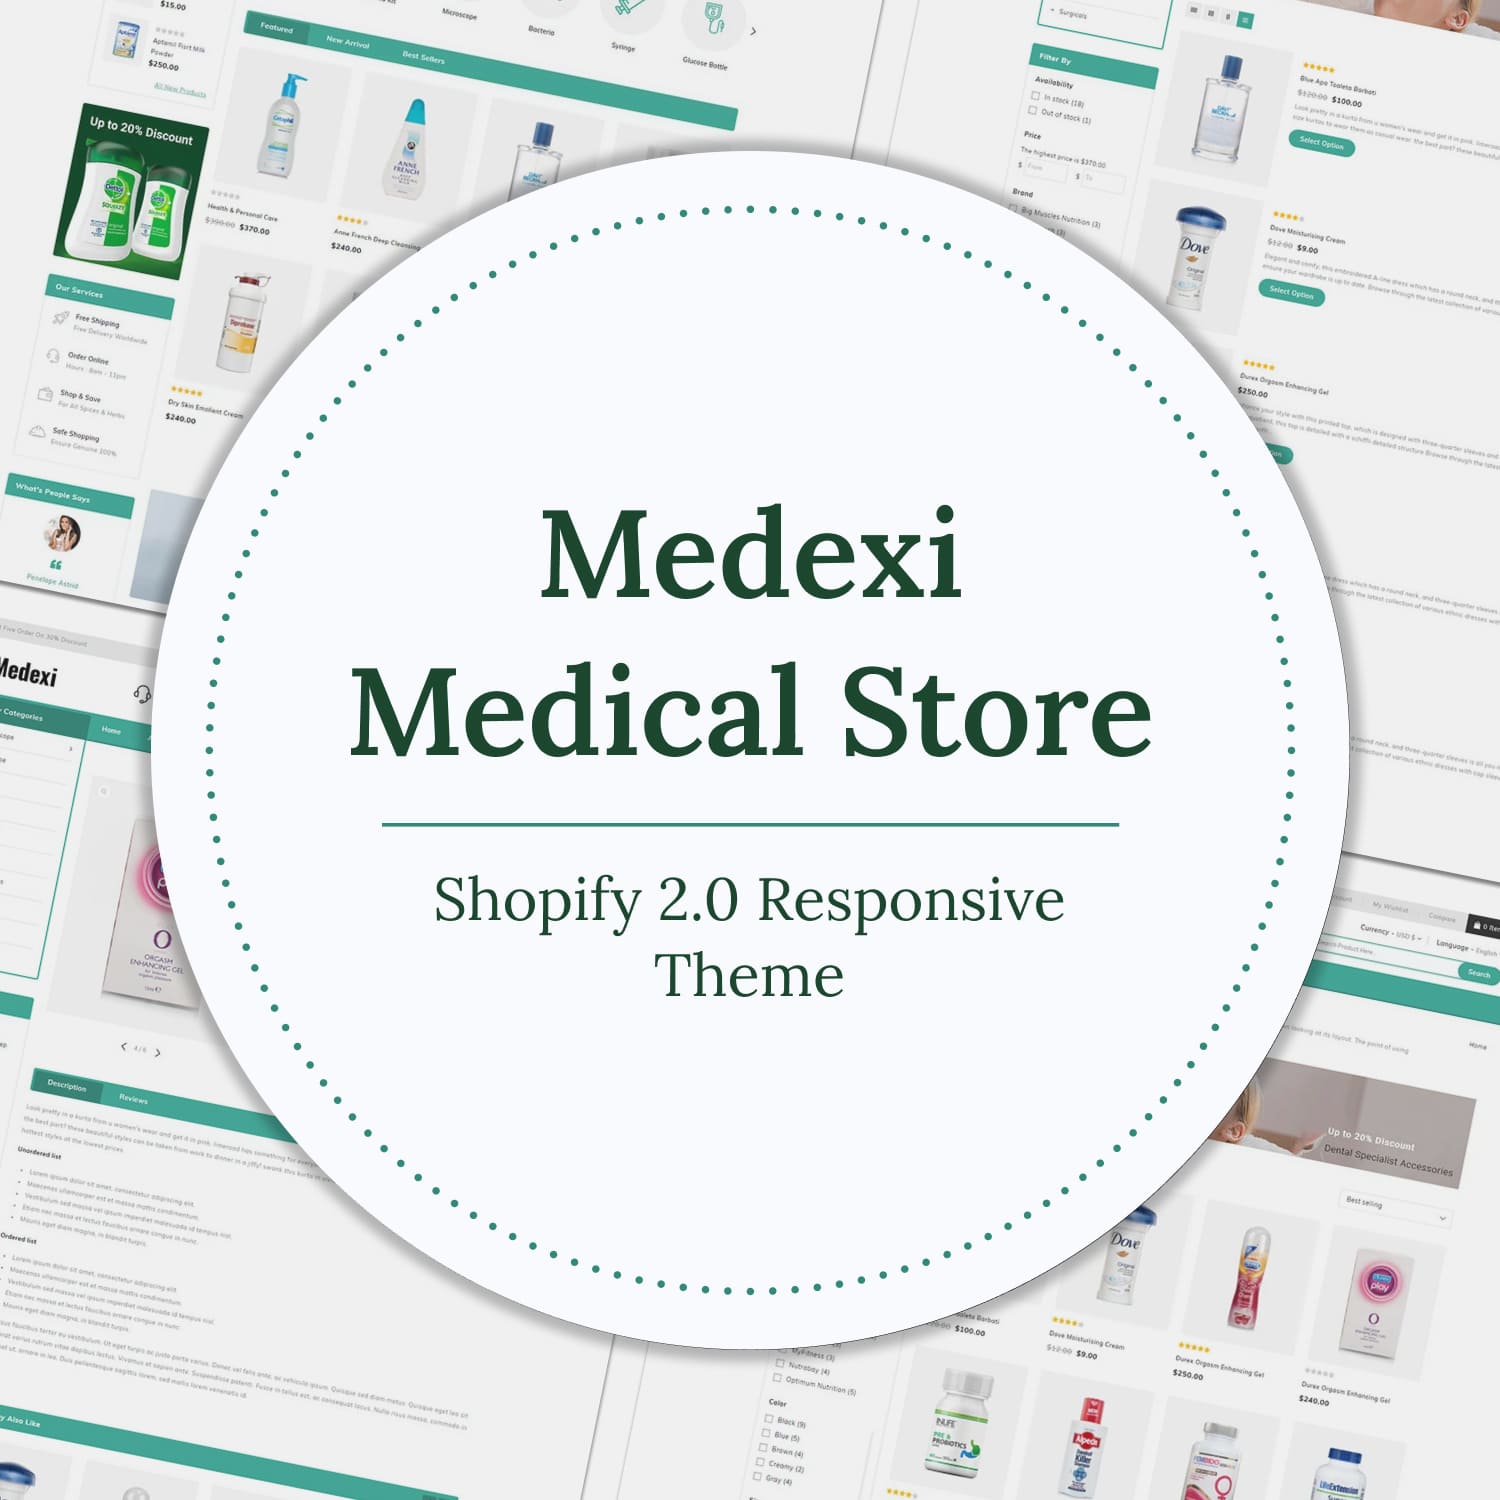 Medexi - Medical Store Shopify 2.0 Responsive Theme.